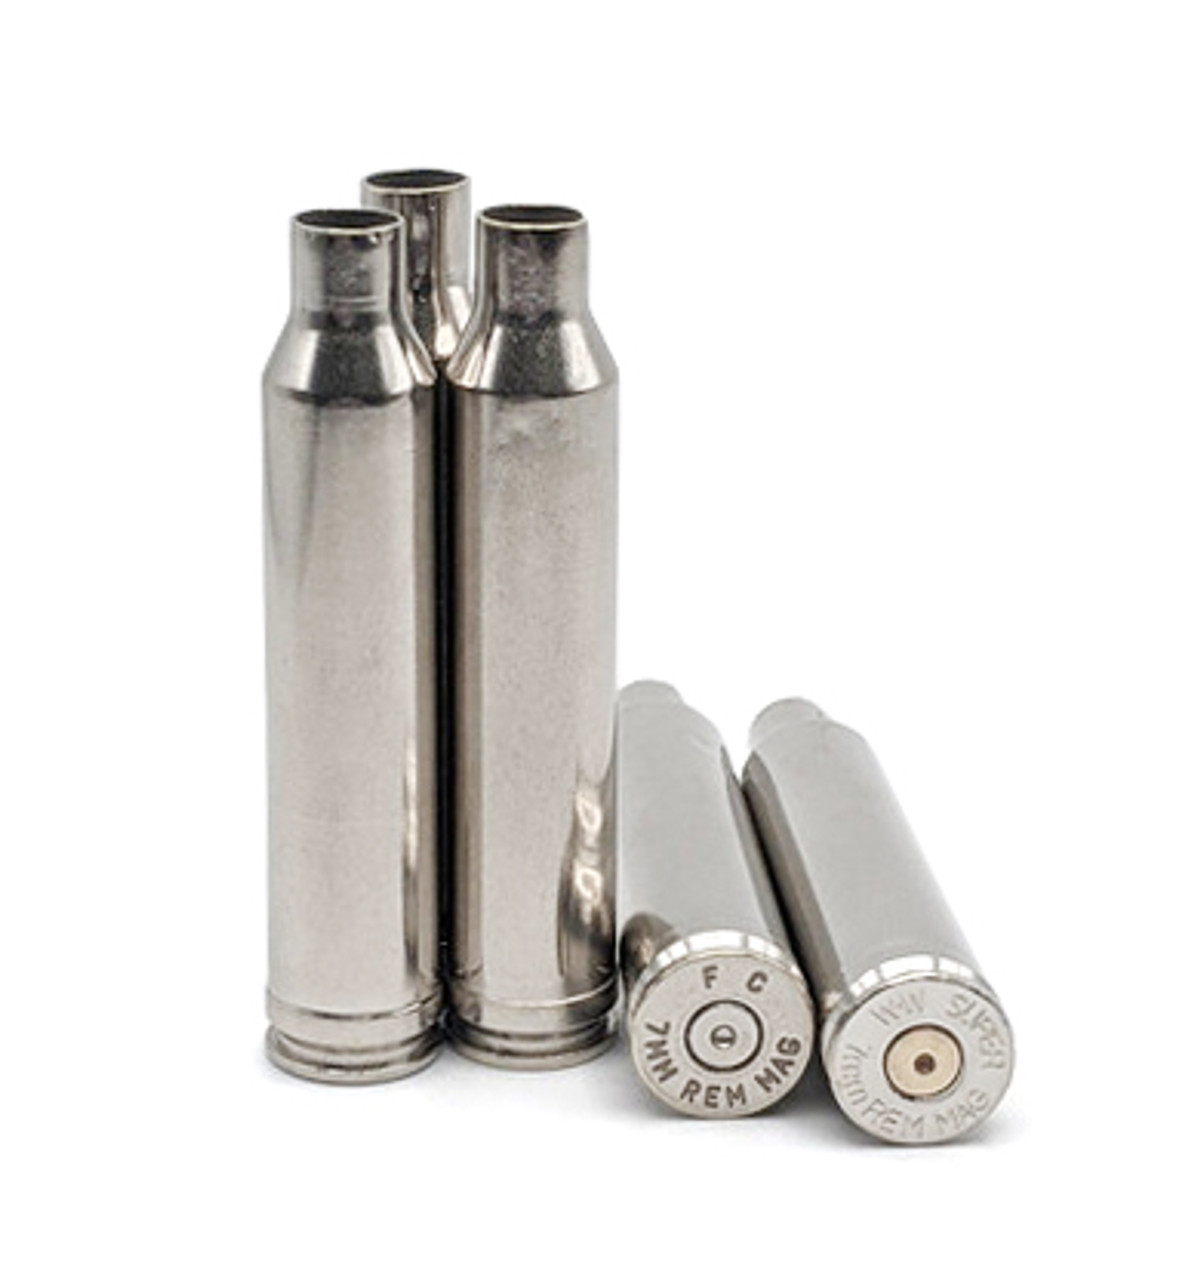 7mm Rem Mag Brass - Nickel Finish - Washed and Polished - 50pcs